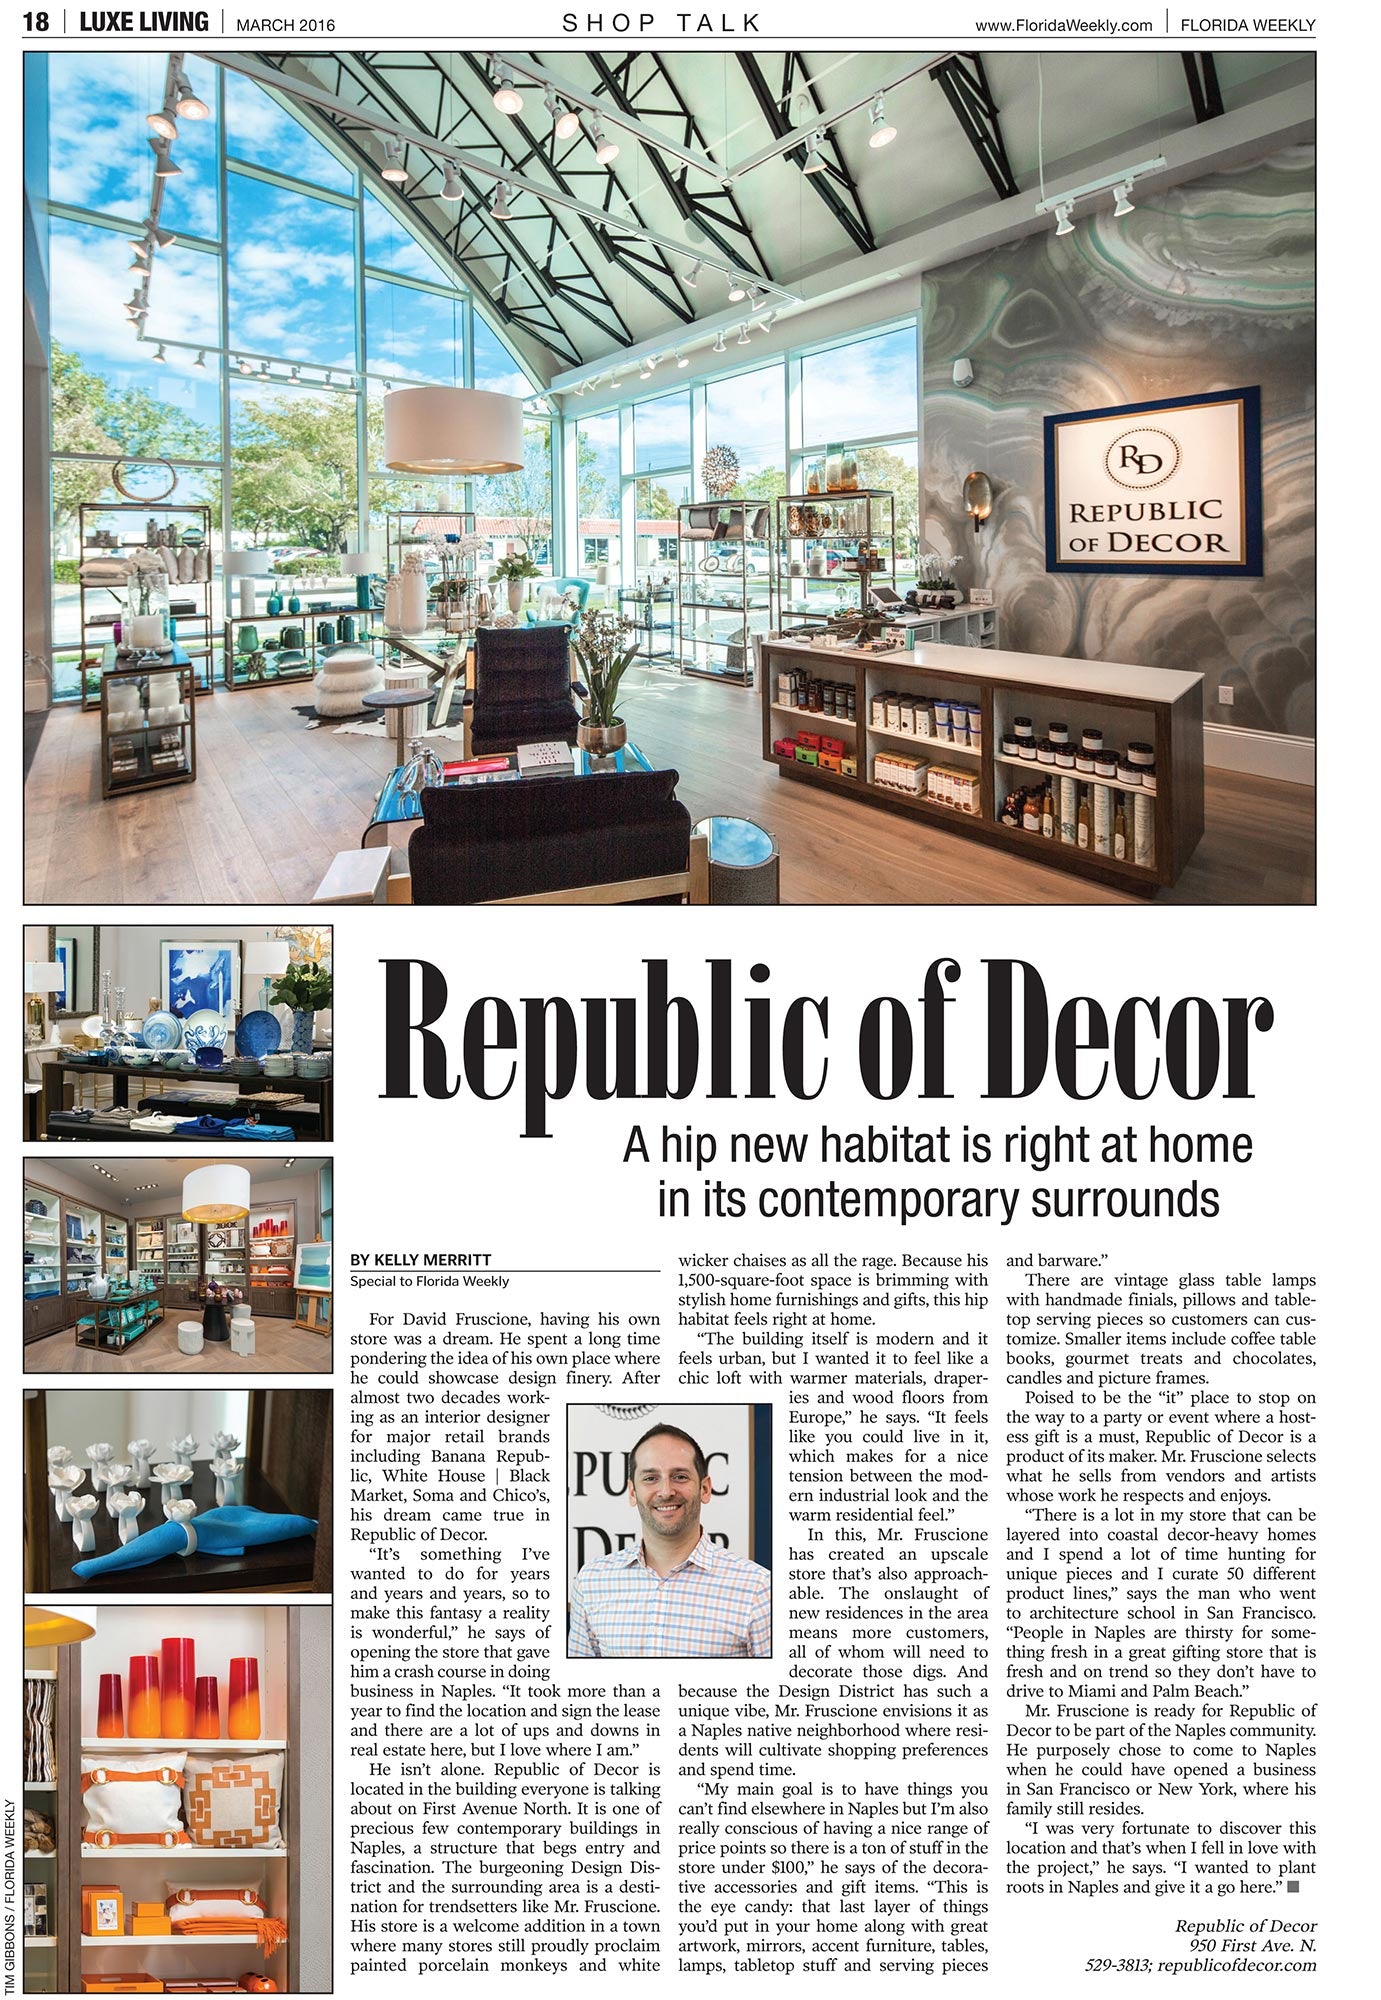 Republic of Decor, owned by David Fruscione (interior designer), is featured in Florida Weekly